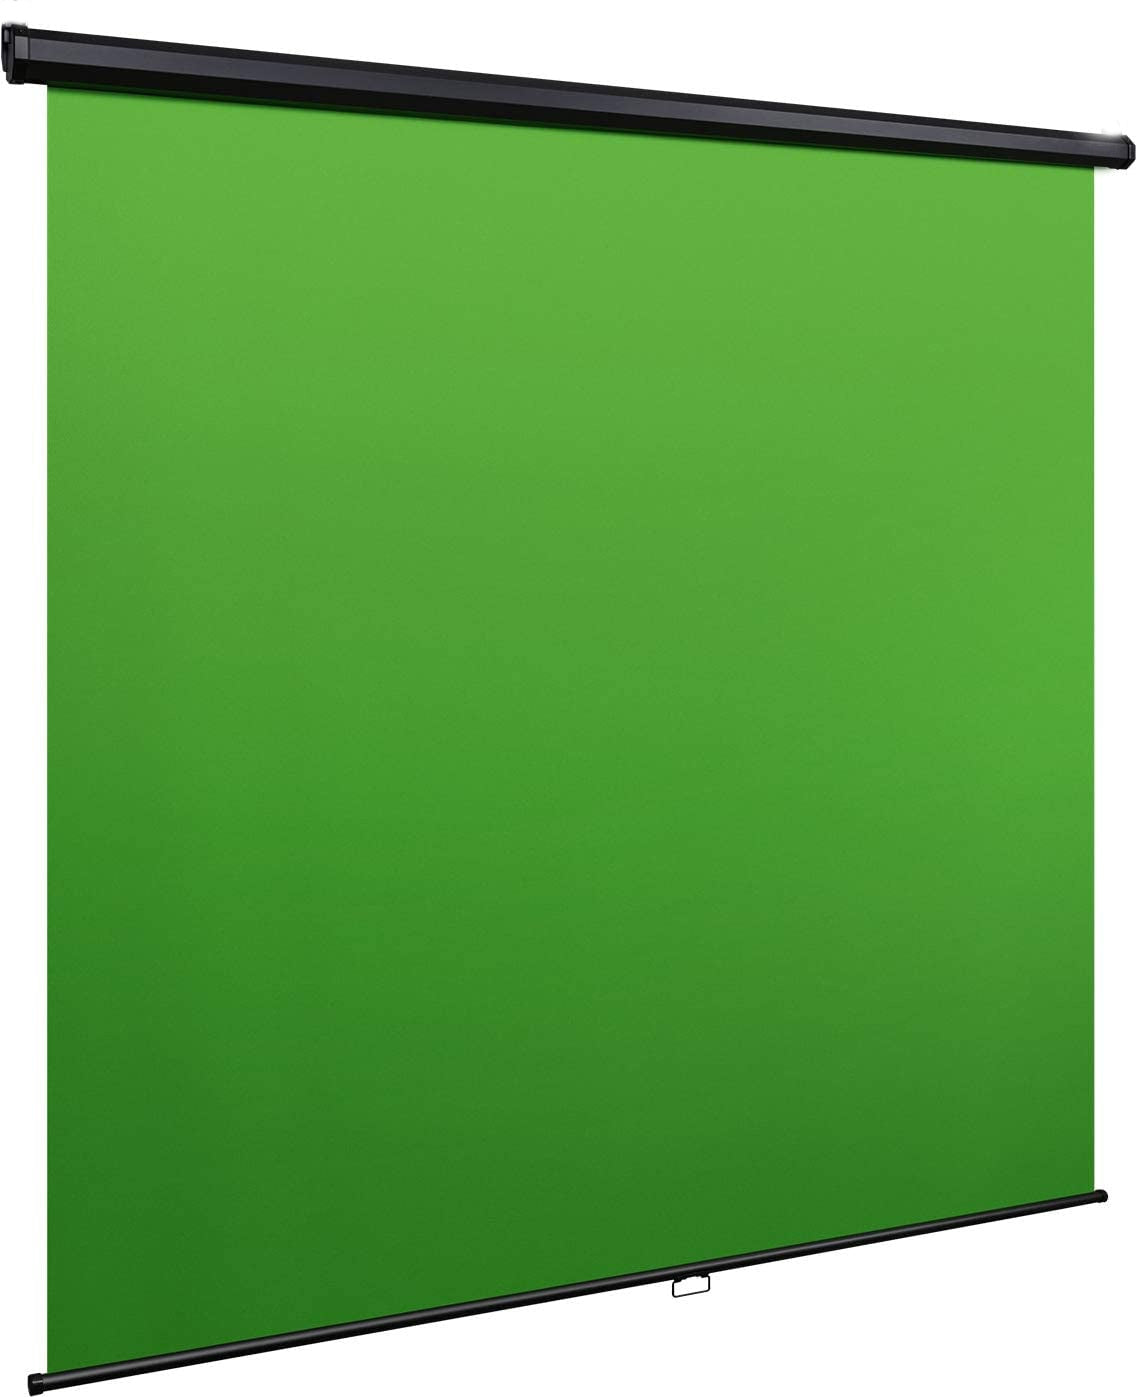 180x180cm Manual Pull-Down Green Screen with Auto Lock